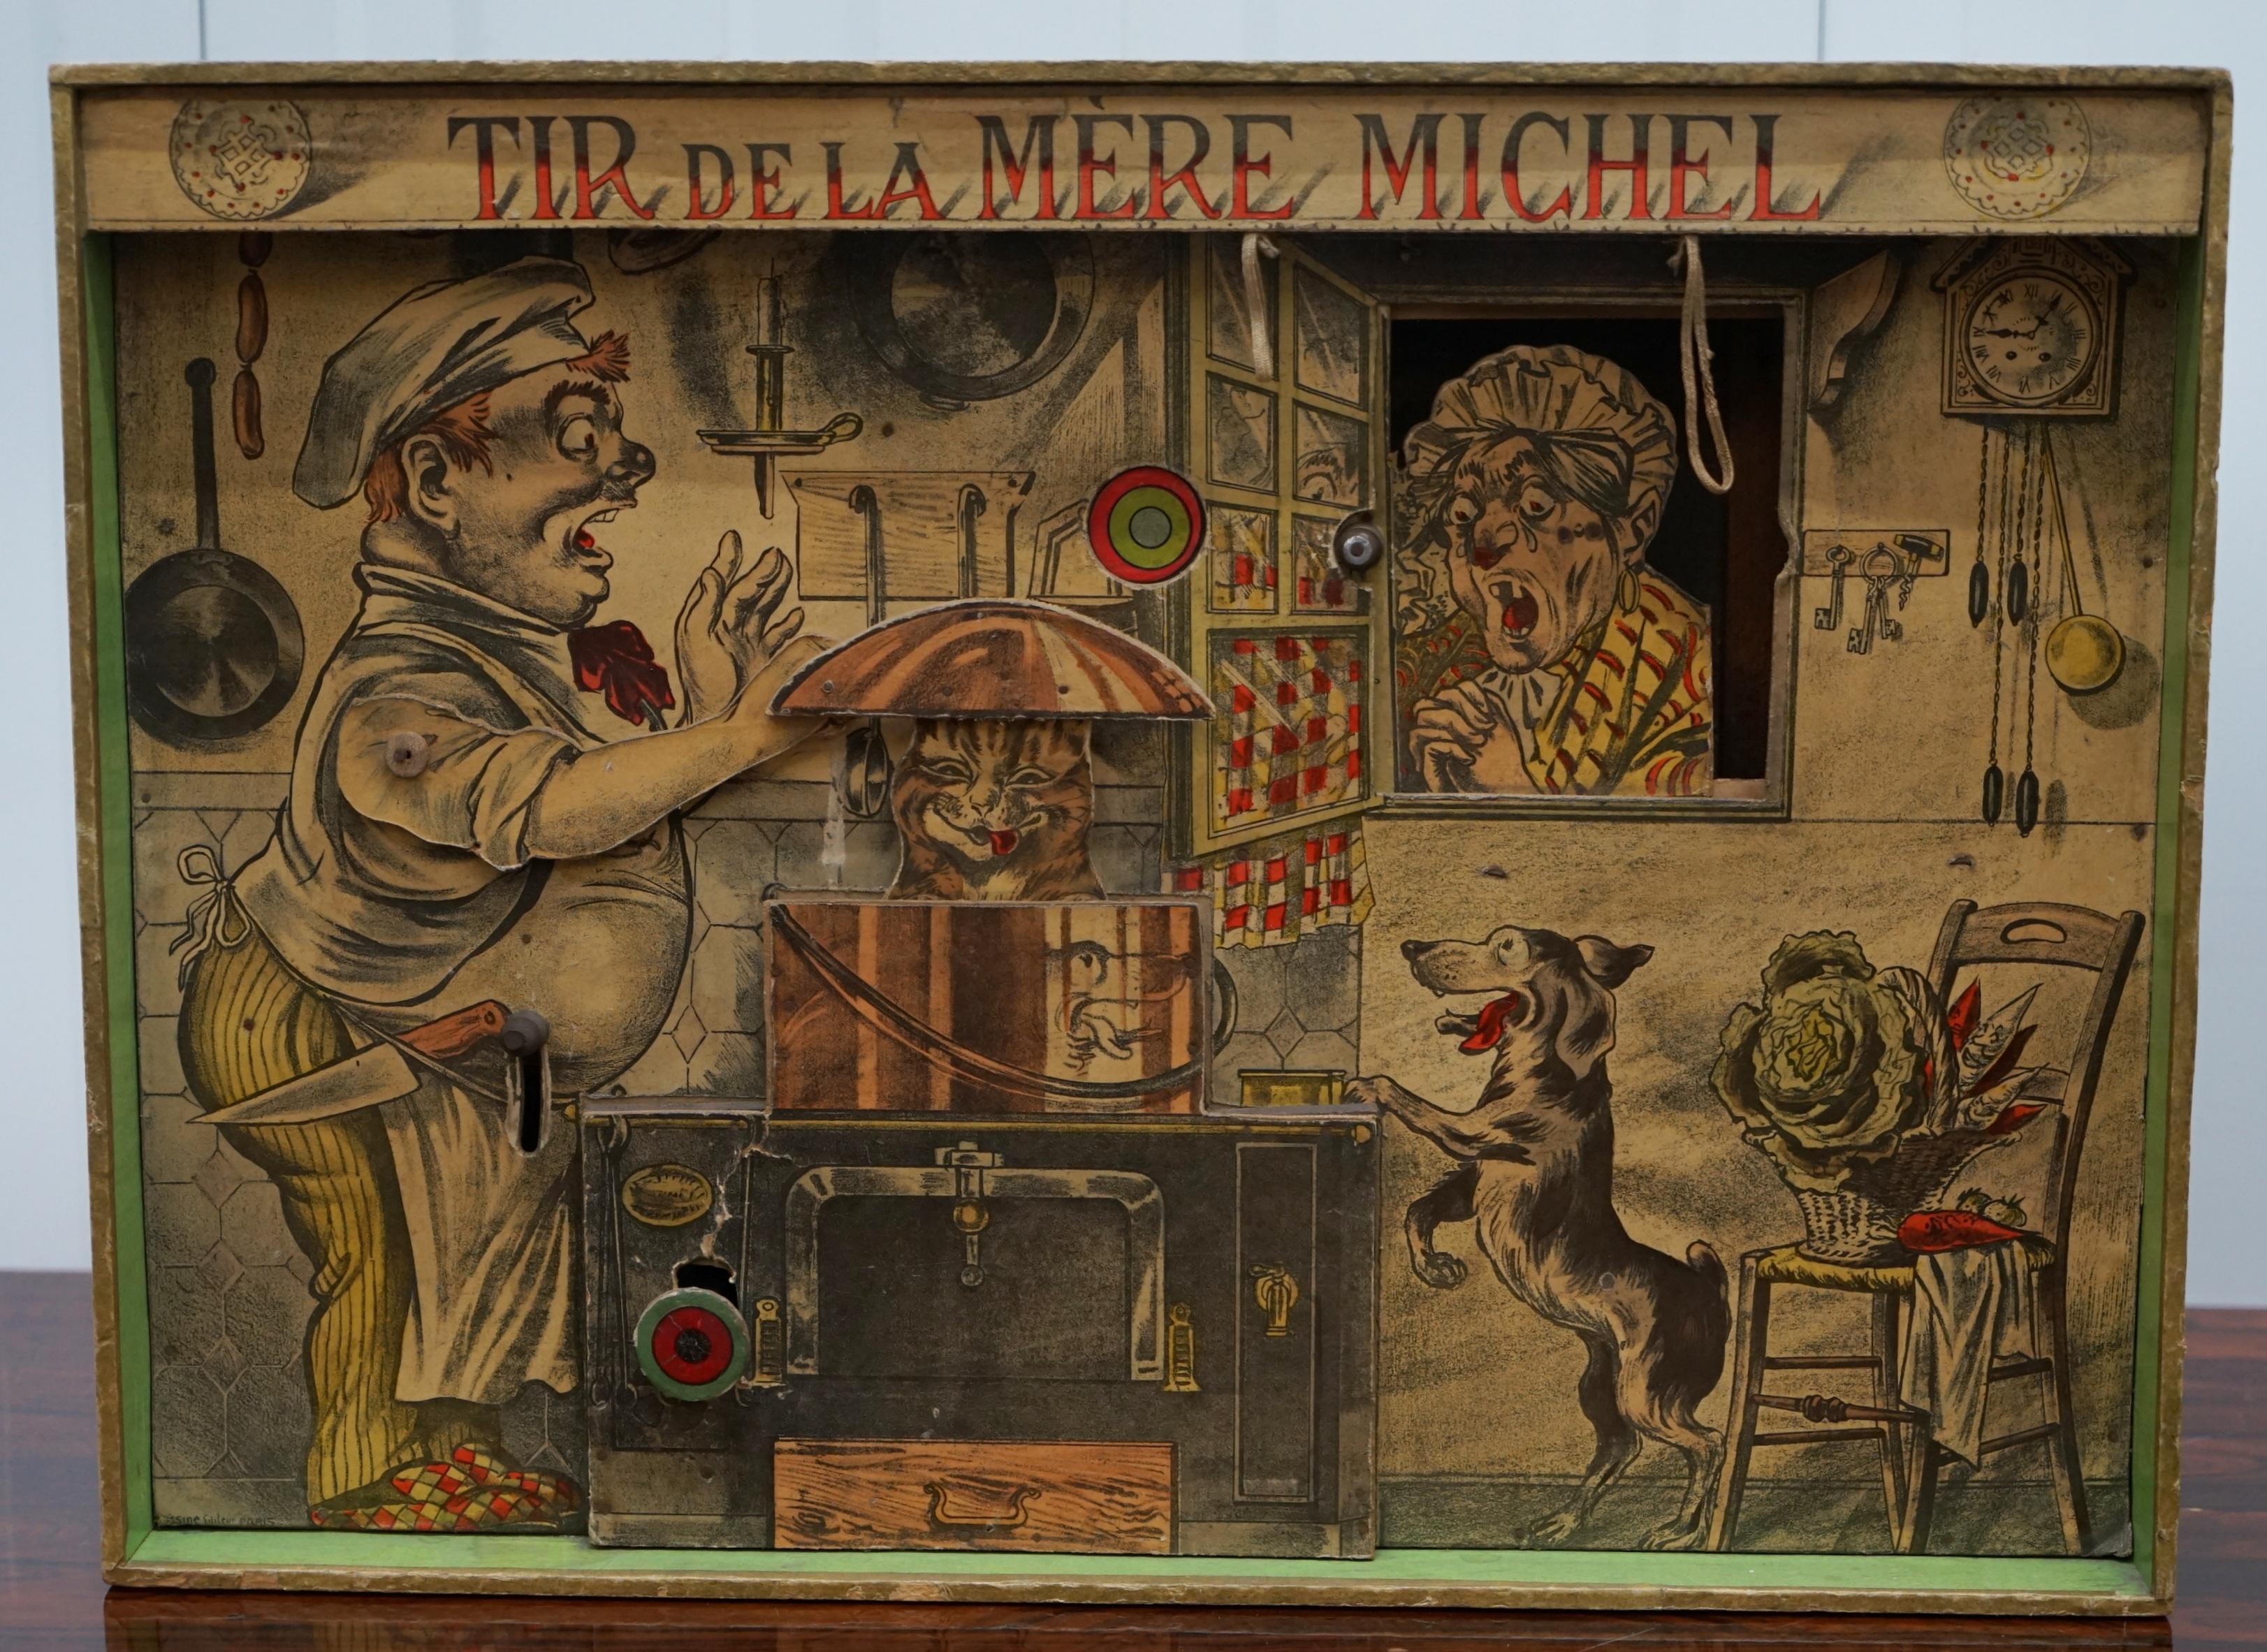 We are delighted to offer this stunning and very rare Tir De La Mere Michel (Shoot the brother of Michel) circa 1900 shooting game by Saussine France

A rare piece of antique French Folk Art in the form of a children’s shooting game

The game is